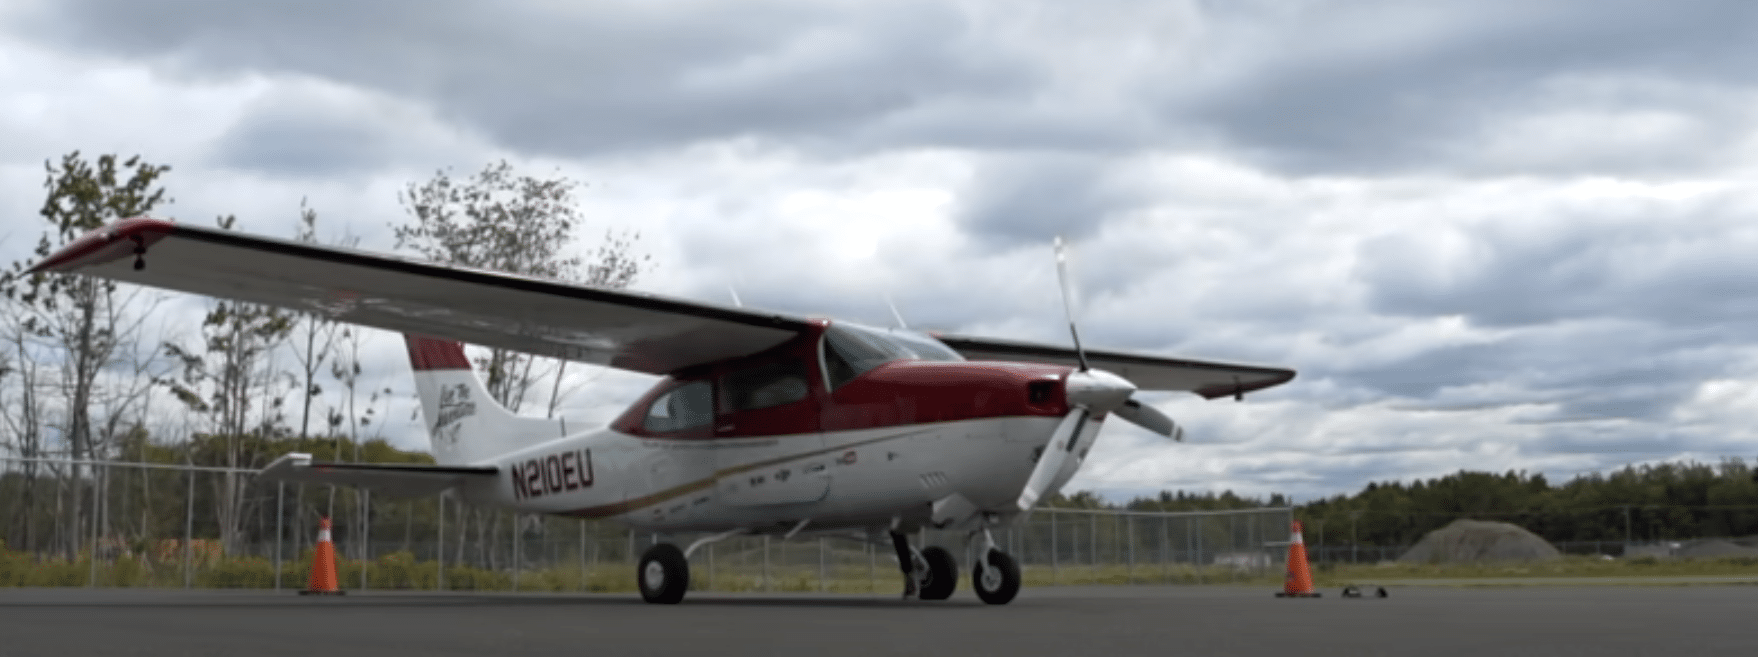 YouTuber went on adventure to cross the Atlantic Ocean in a Cessna